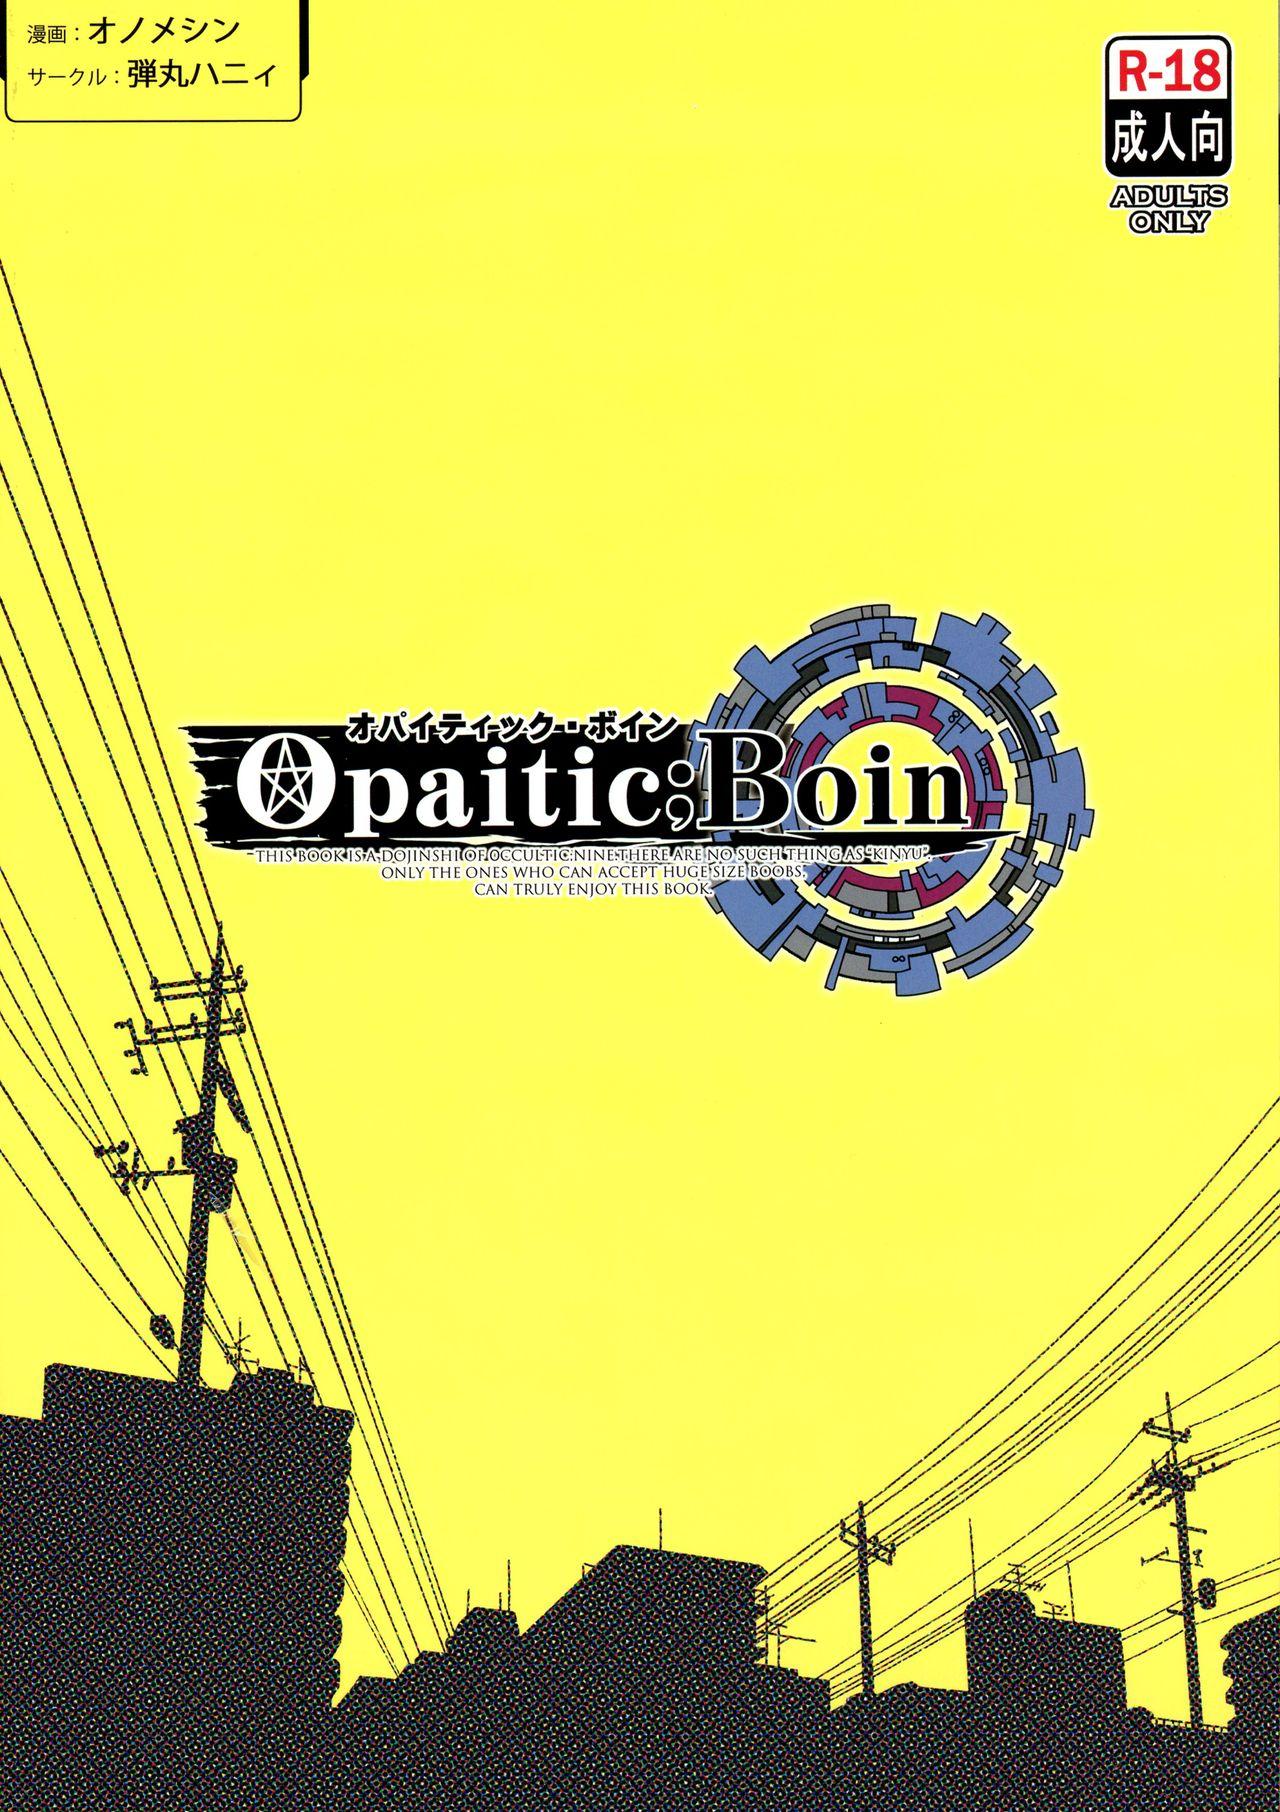 Amador Opaitic;Boin - Occultic nine Slim - Page 2